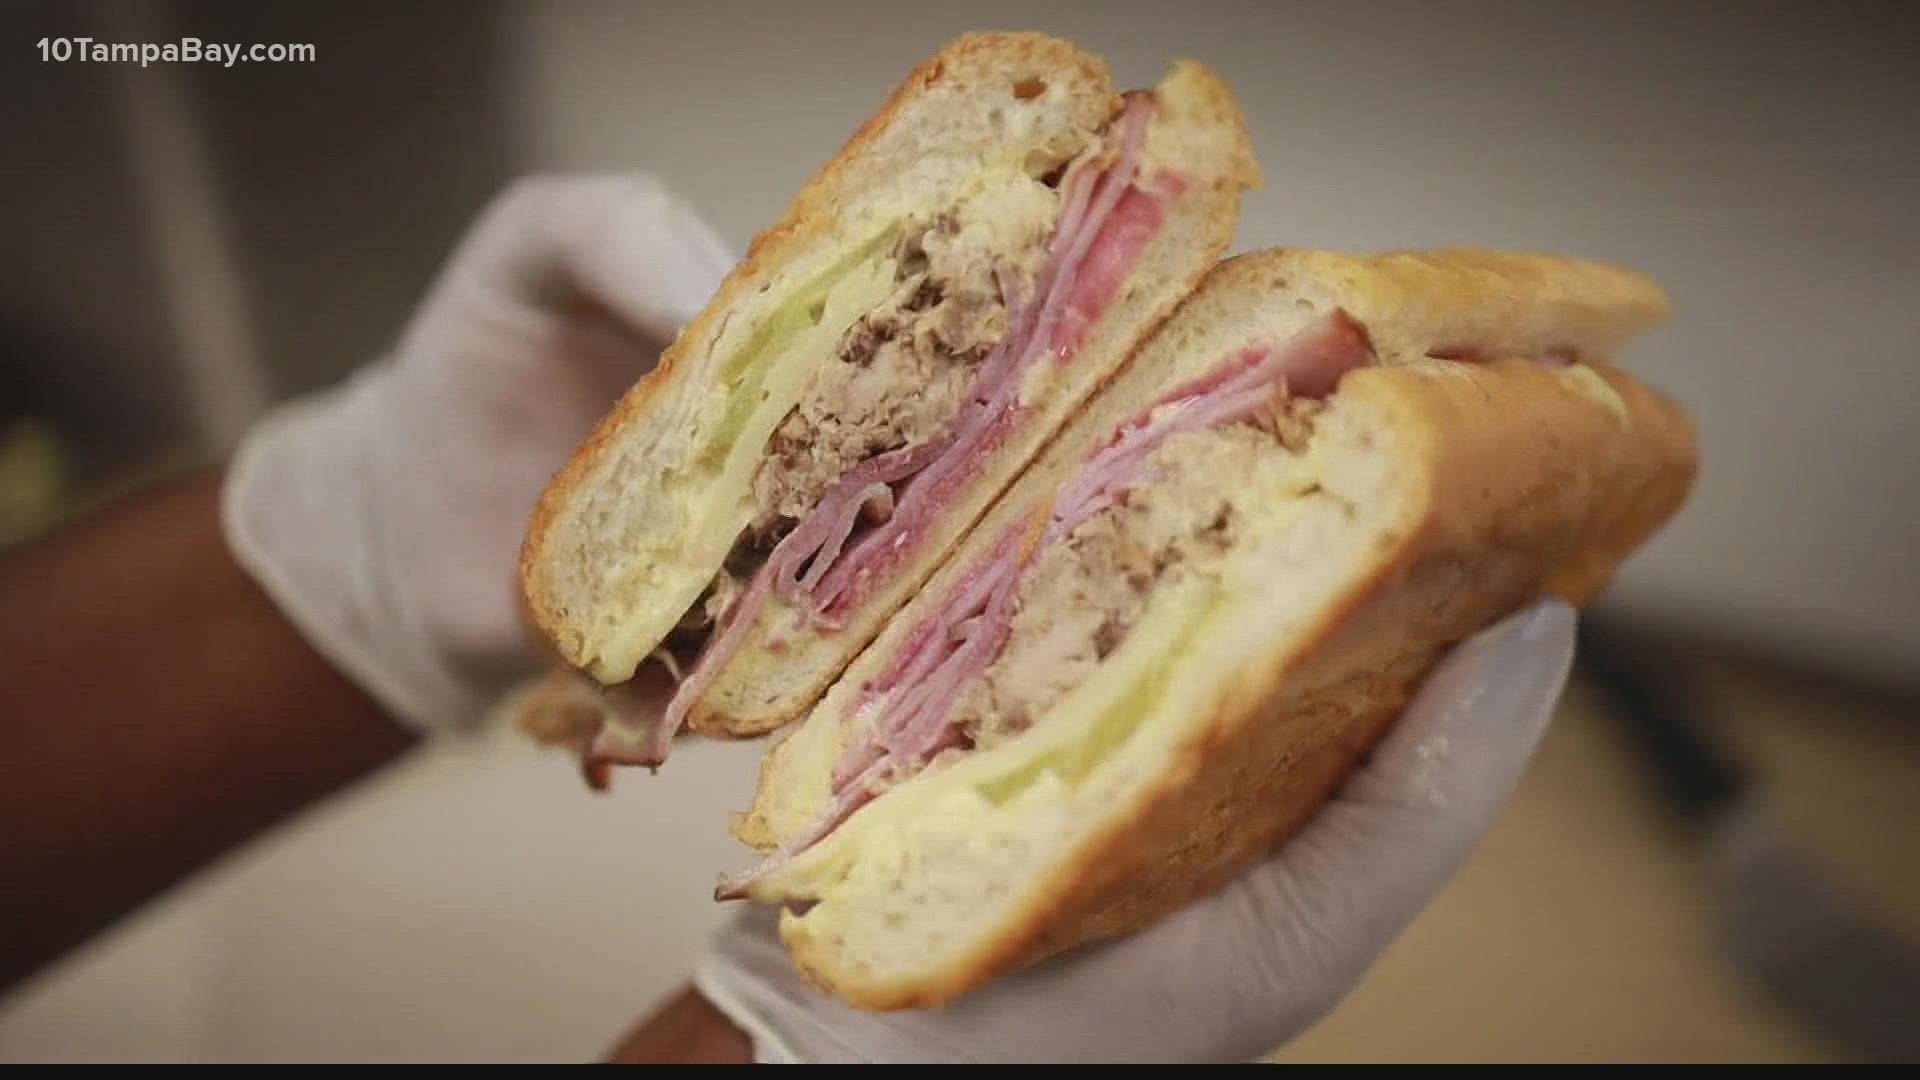 La Segunda says traditional Cuban sandwiches are made with meat, cheese, sauce, pickles, and pressed with butter.